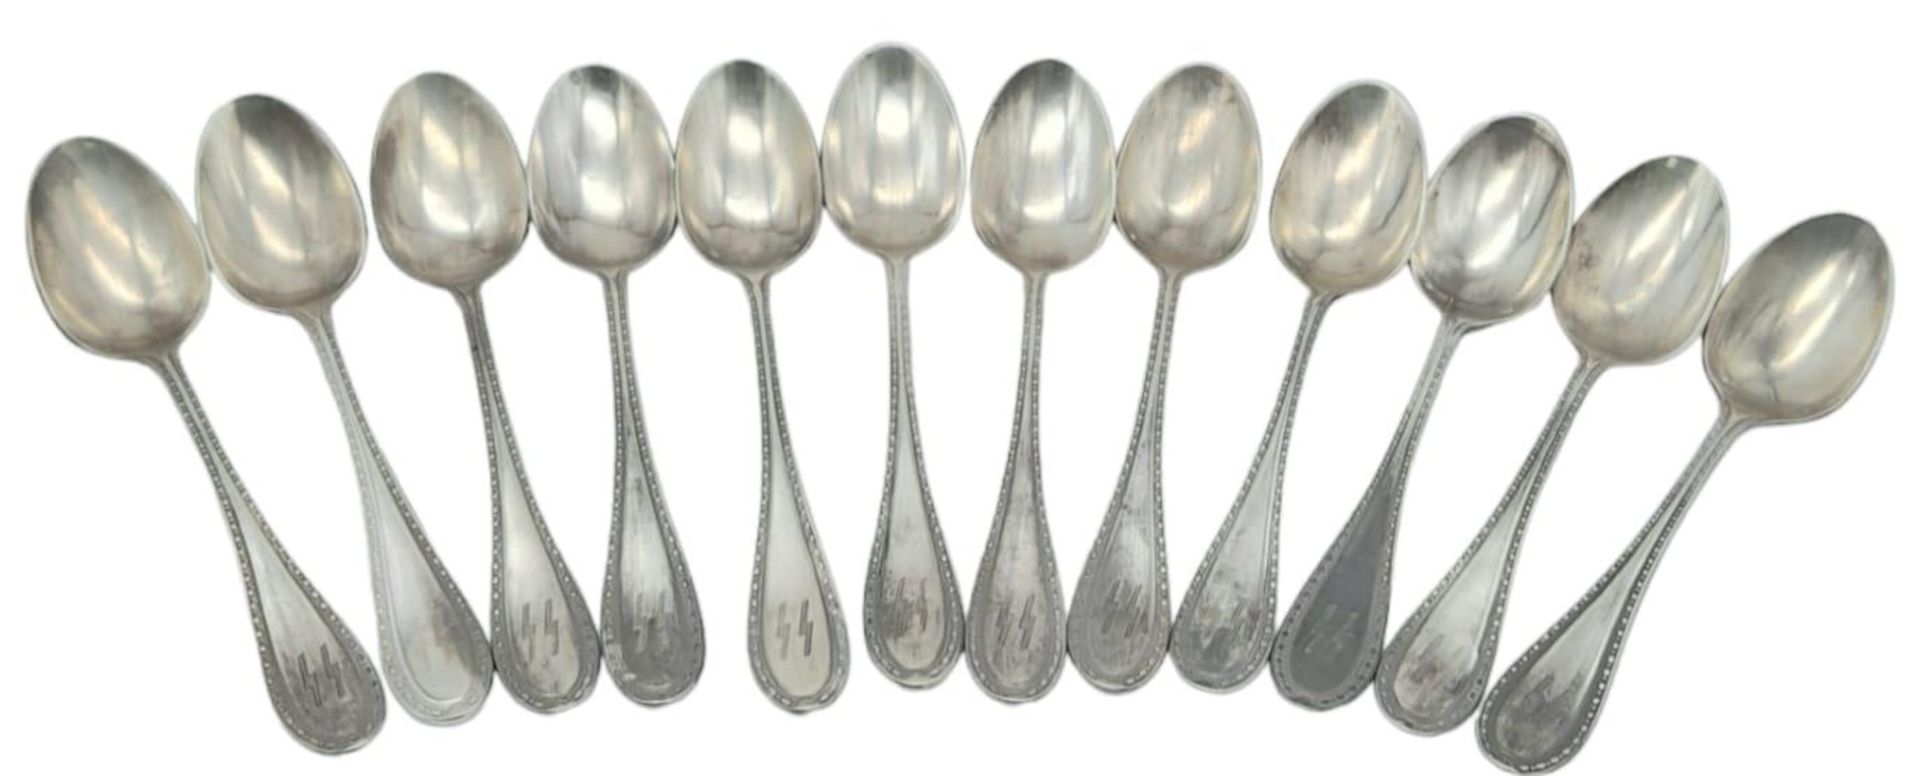 3rd Reich Waffen SS Set of 12 Silver Spoons with makers mark one the bowls. Tested as .800 Silver.